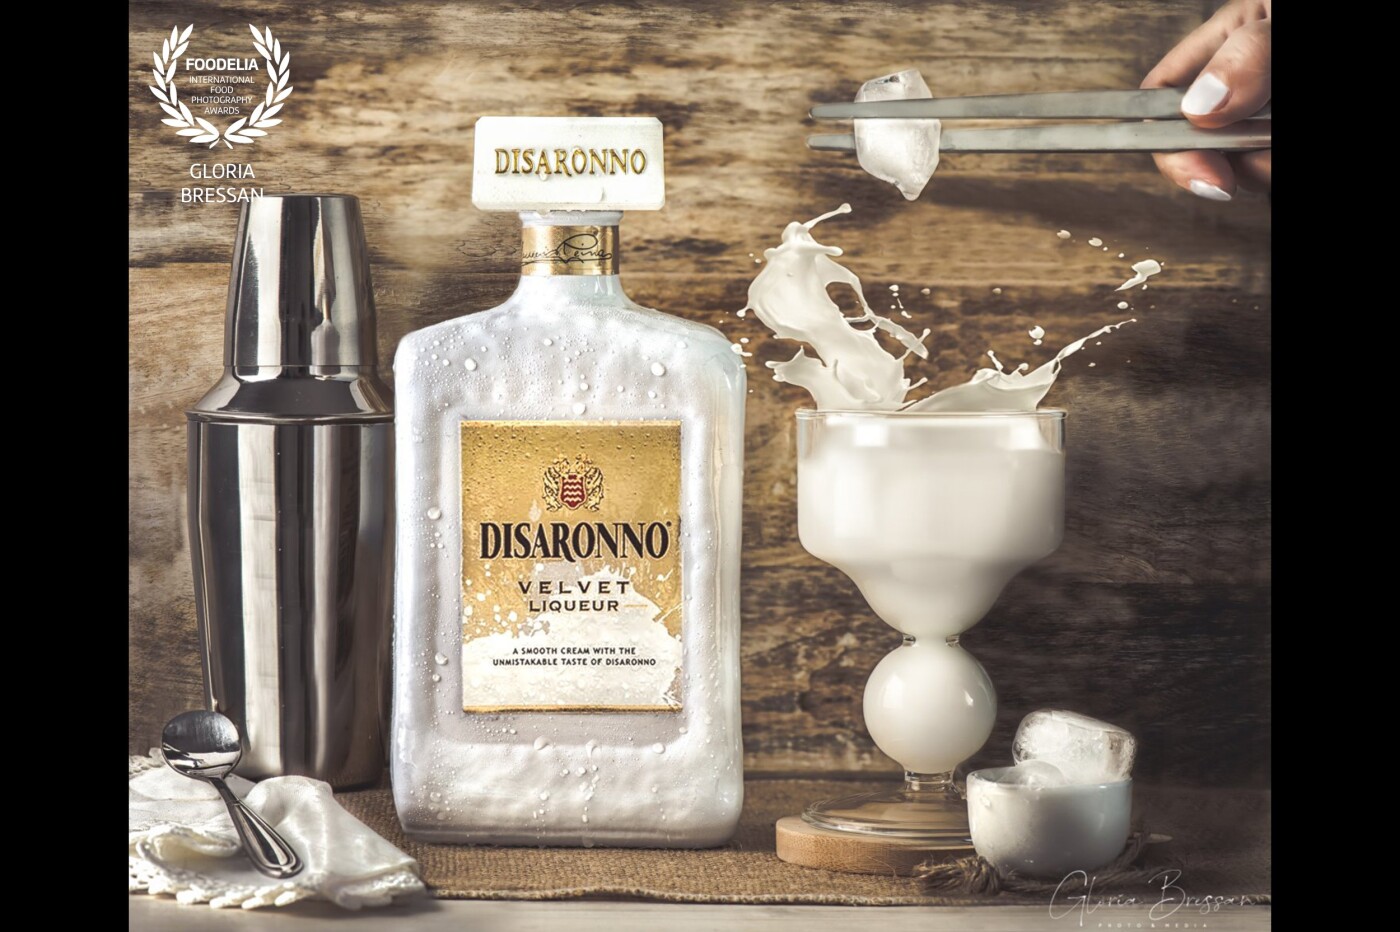 Di Saranno Velvet is a Classic Italian liquor, with a splas effect! The velvet drink is super cool and delicious . Prosit, cheers,Prost, Cin Cin!